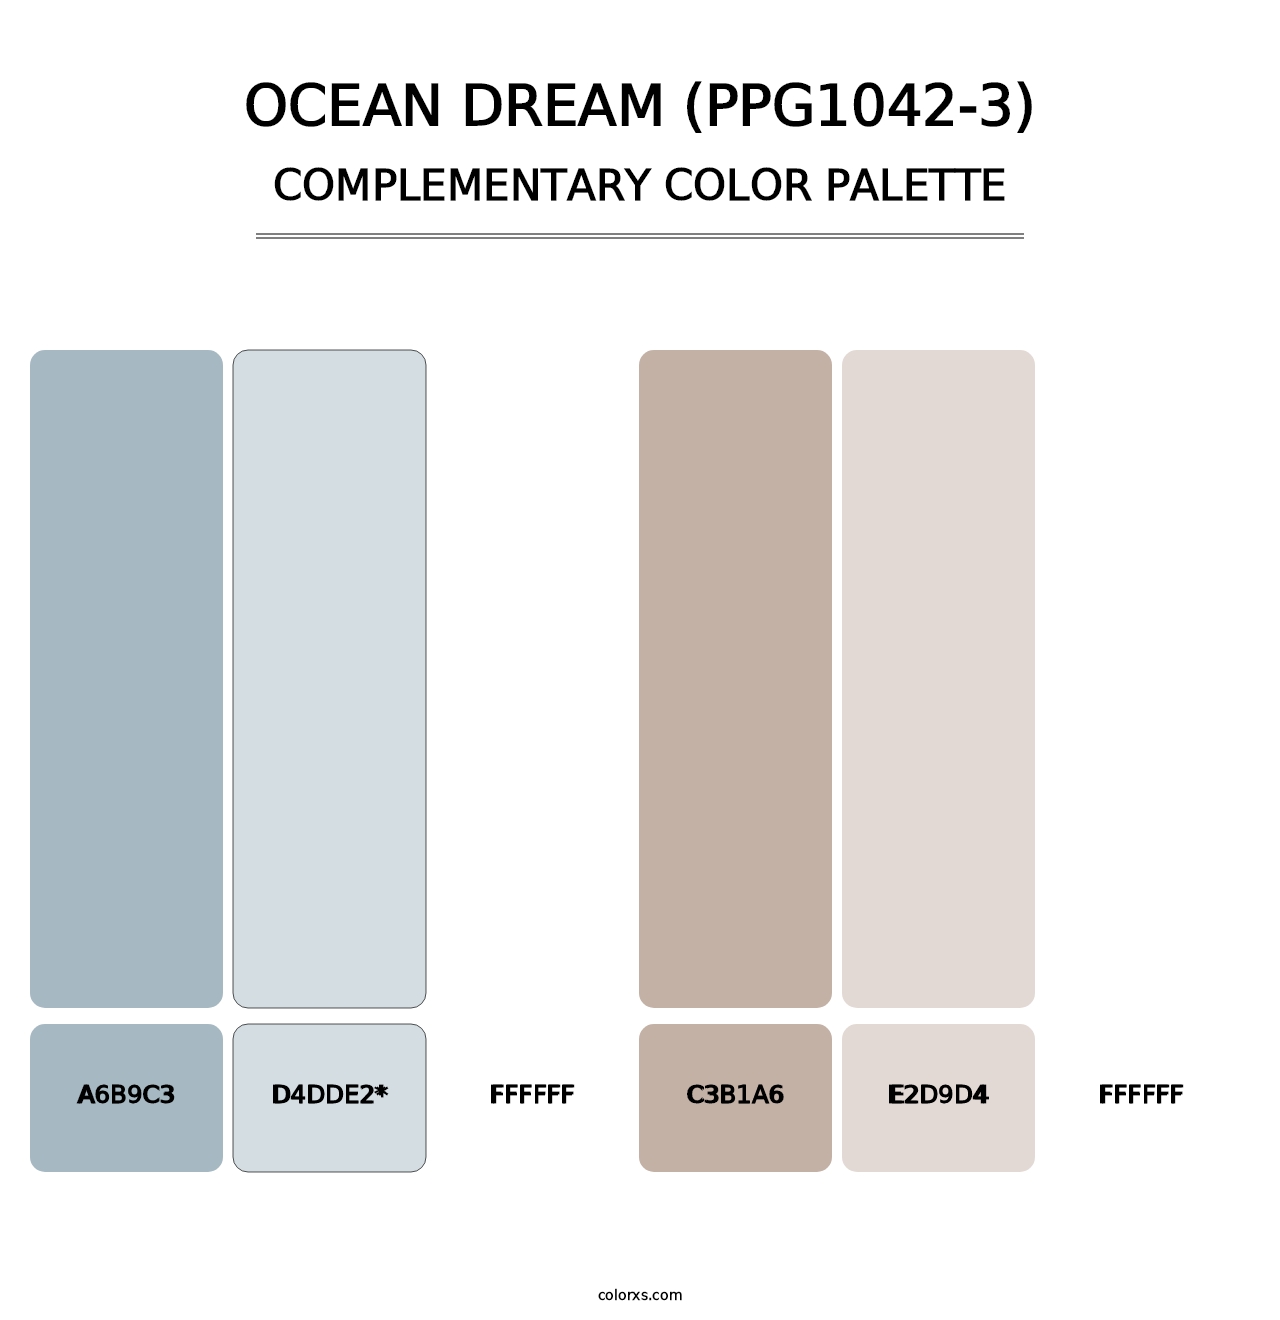 Ocean Dream (PPG1042-3) - Complementary Color Palette